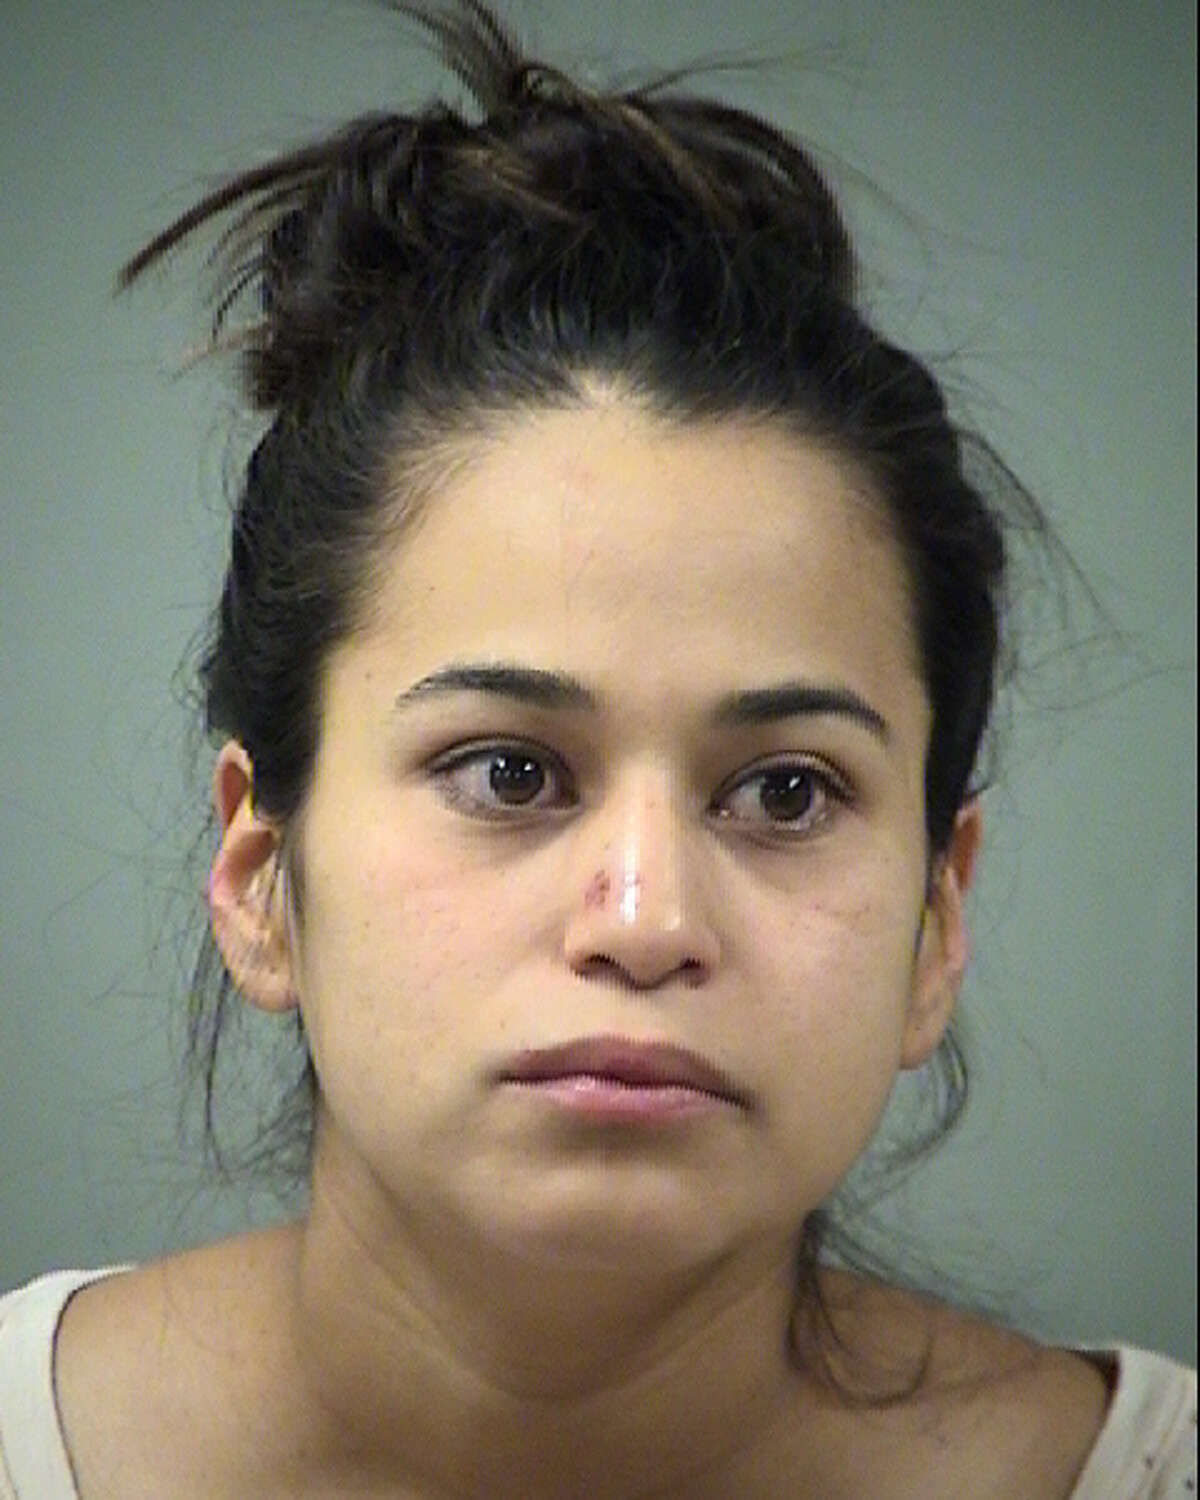 Ruth Marisol Trevino was charged with driving while intoxicated with a child on Sept. 11, 2018.